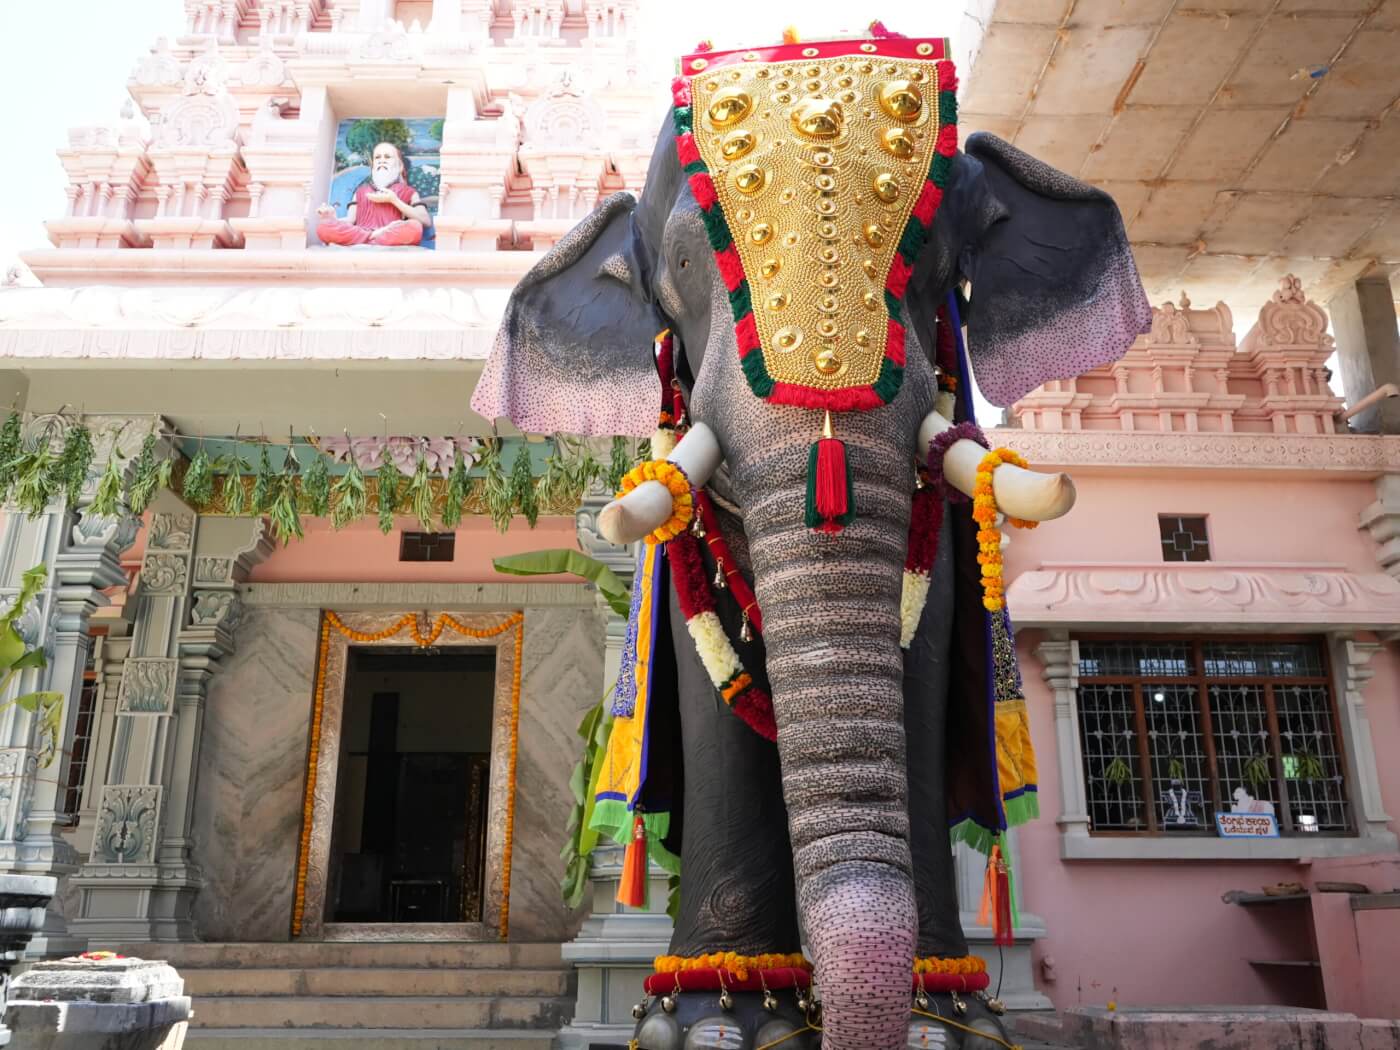 Actors Aindrita Ray and Diganth Manchale Join PETA India in Donating a Life-Size Mechanical Elephant to Mysuru’s Sri Suttur Math